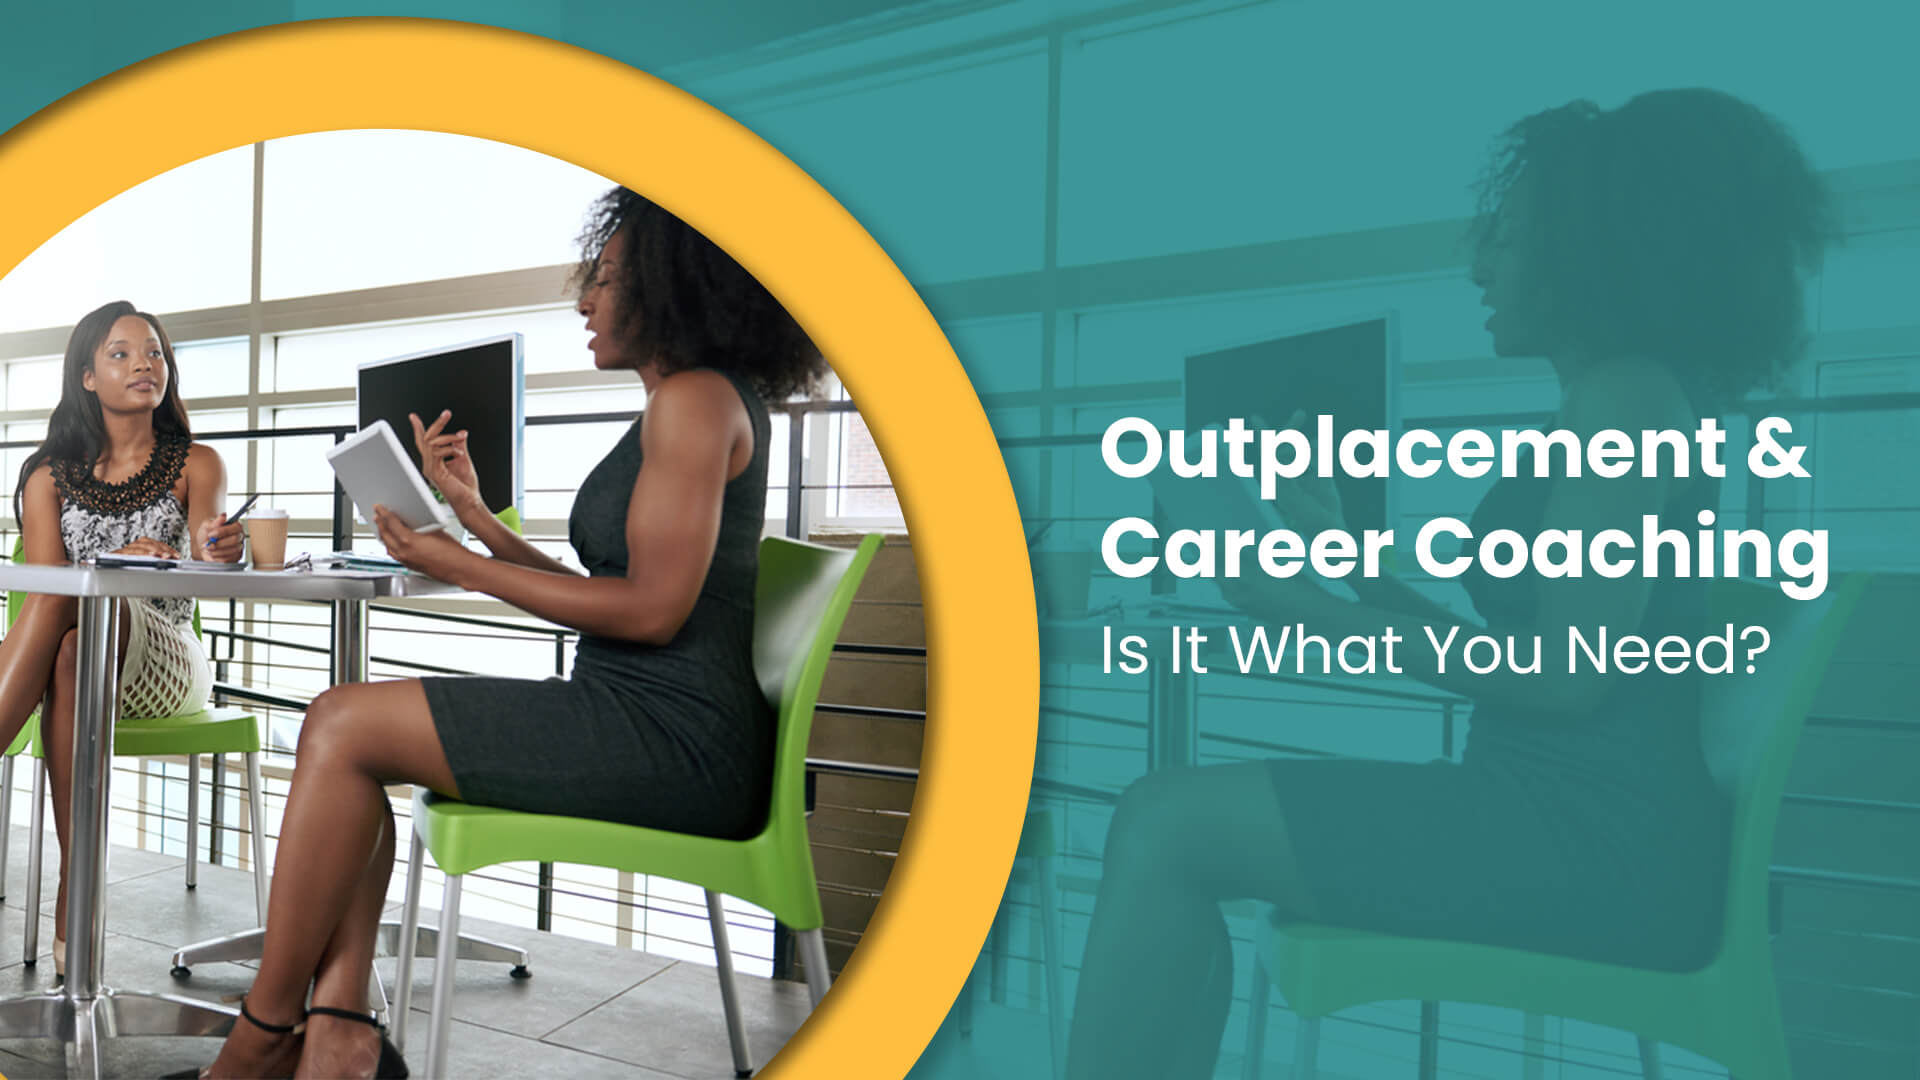 Outplacement and career coaching - is it what you need